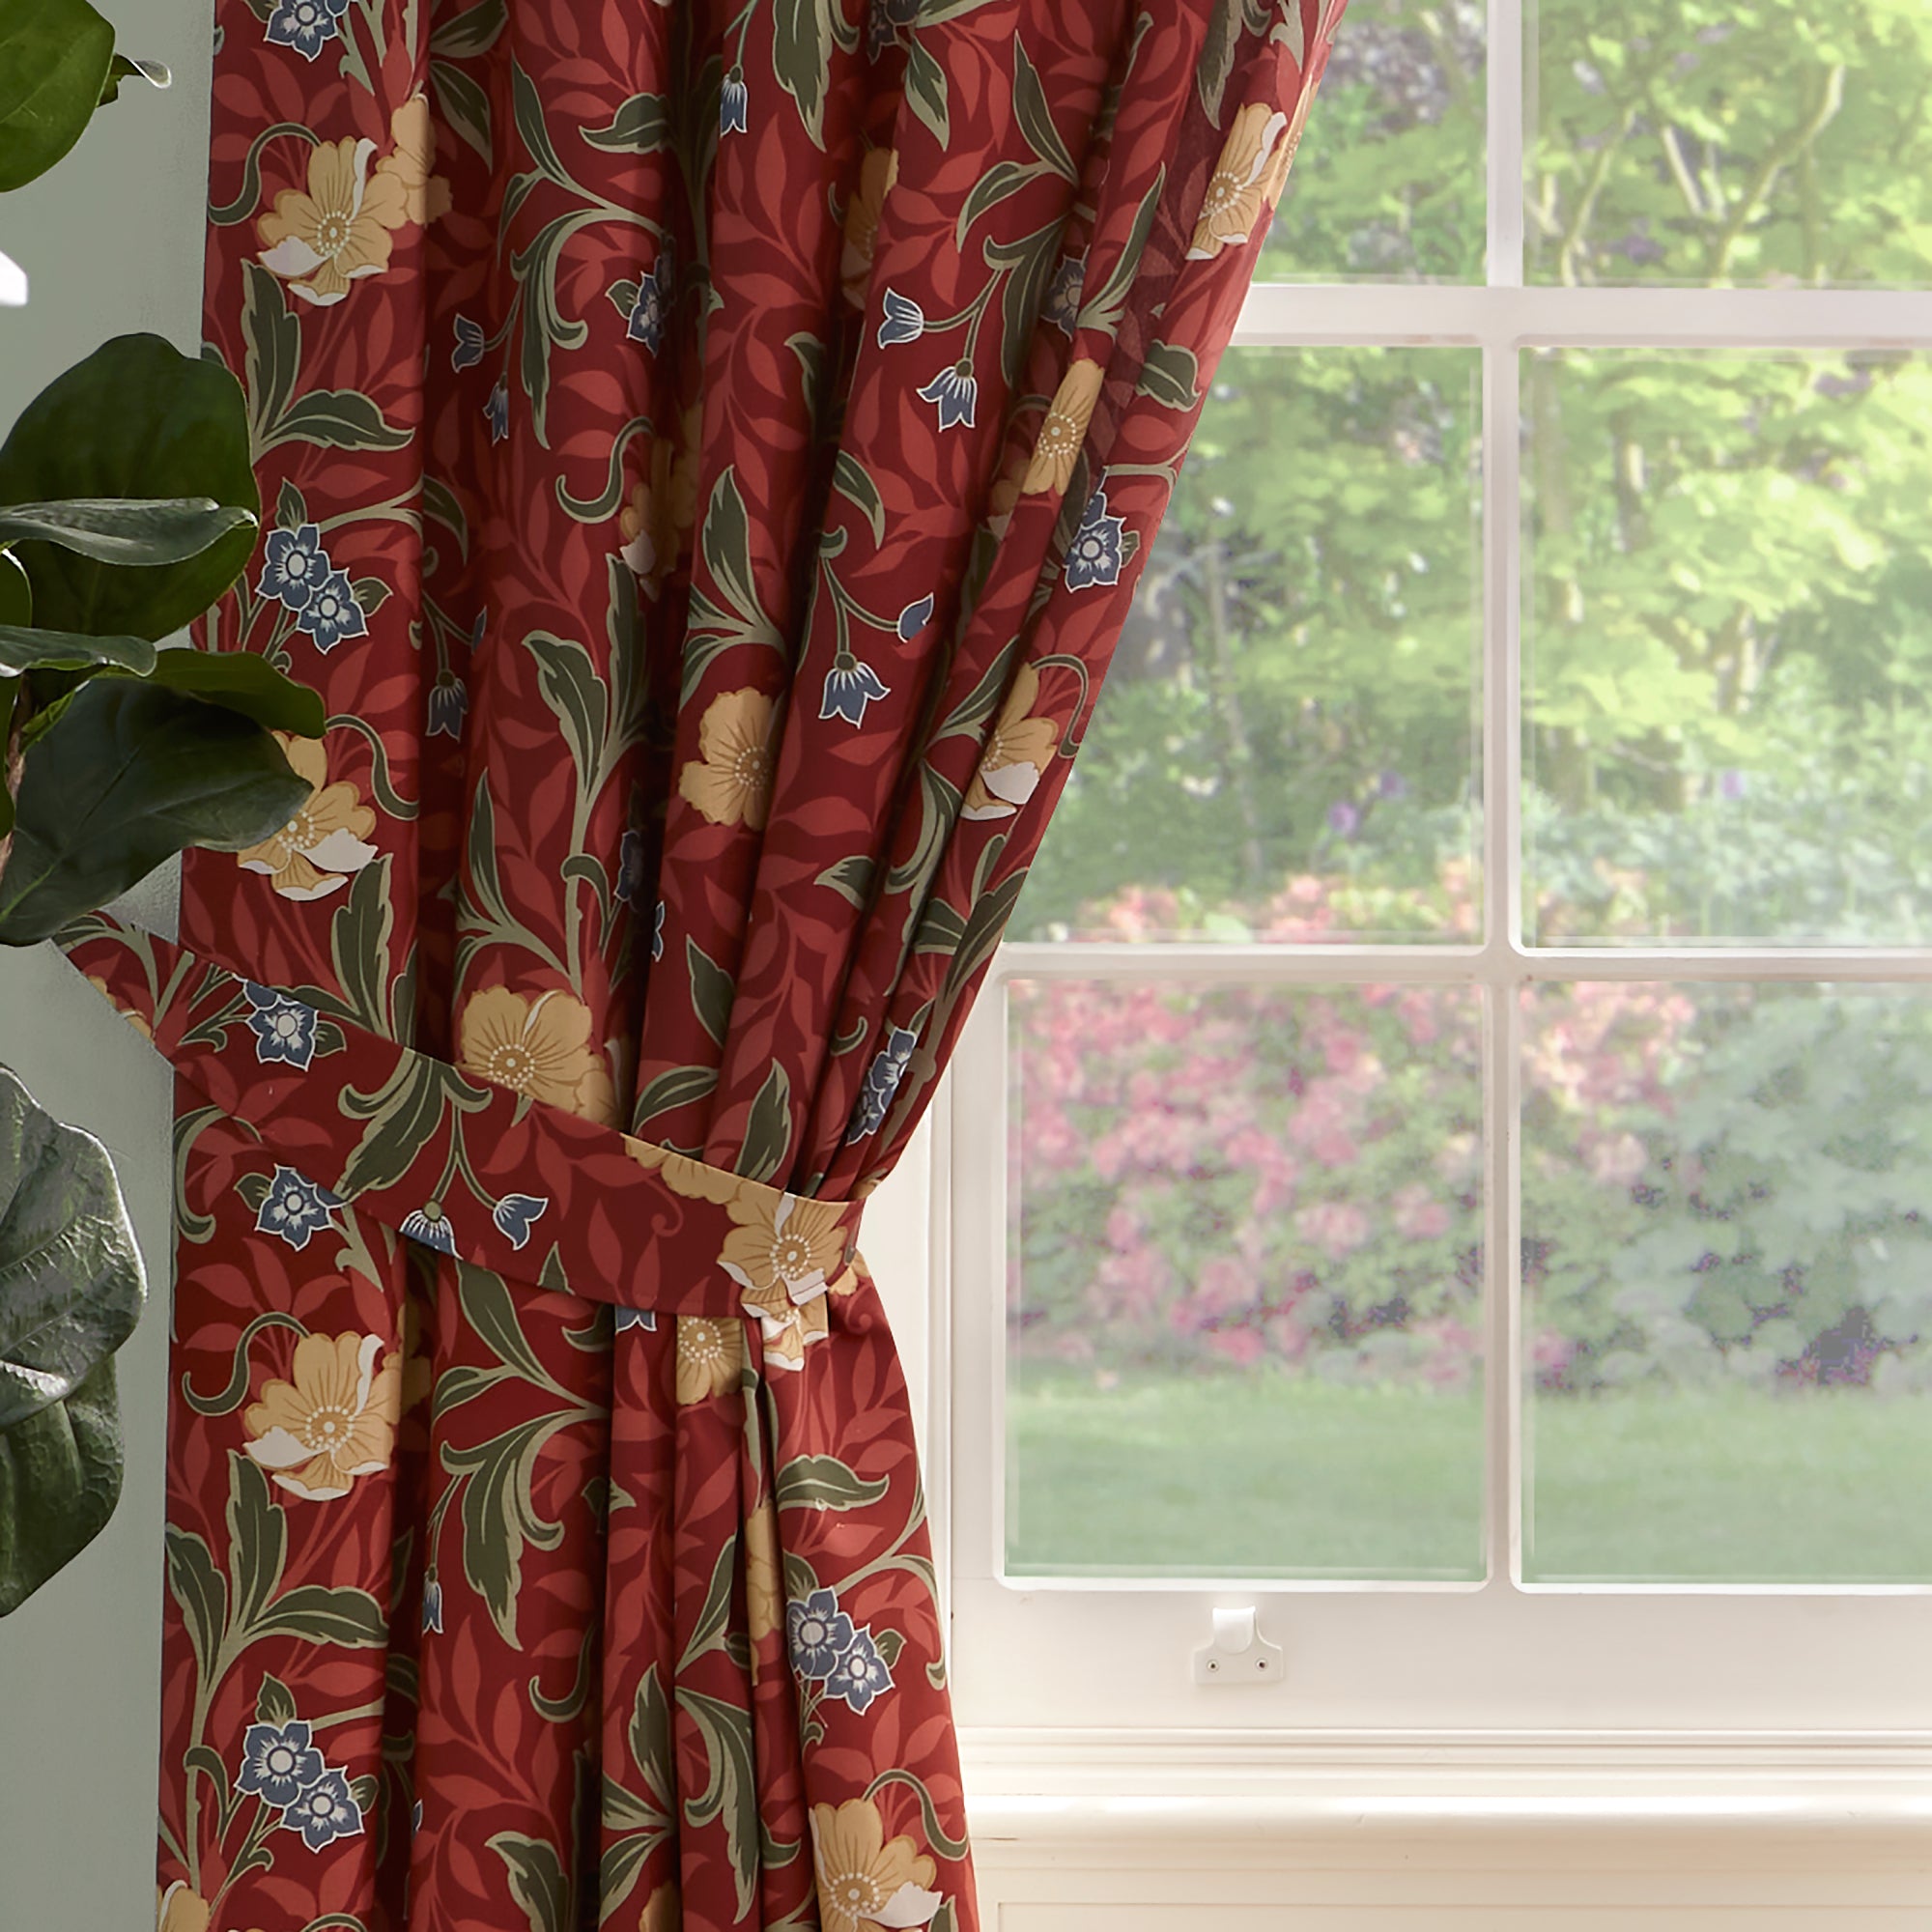 Pair of Pencil Pleat Curtains With Tie-Backs Sandringham by D&D in Red